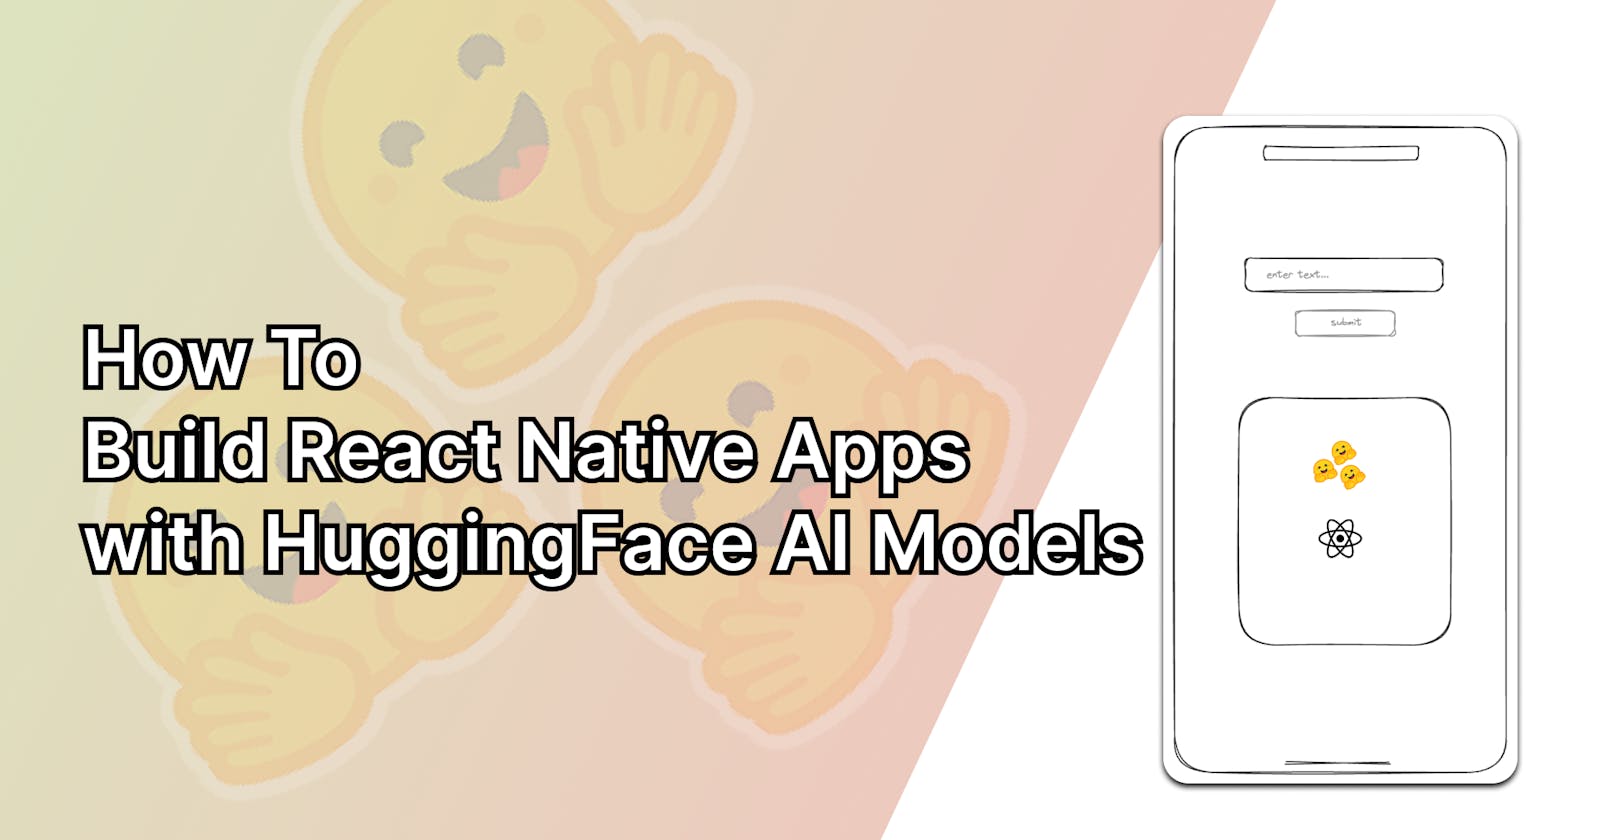 Build React Native Apps with Hugging Face AI Models